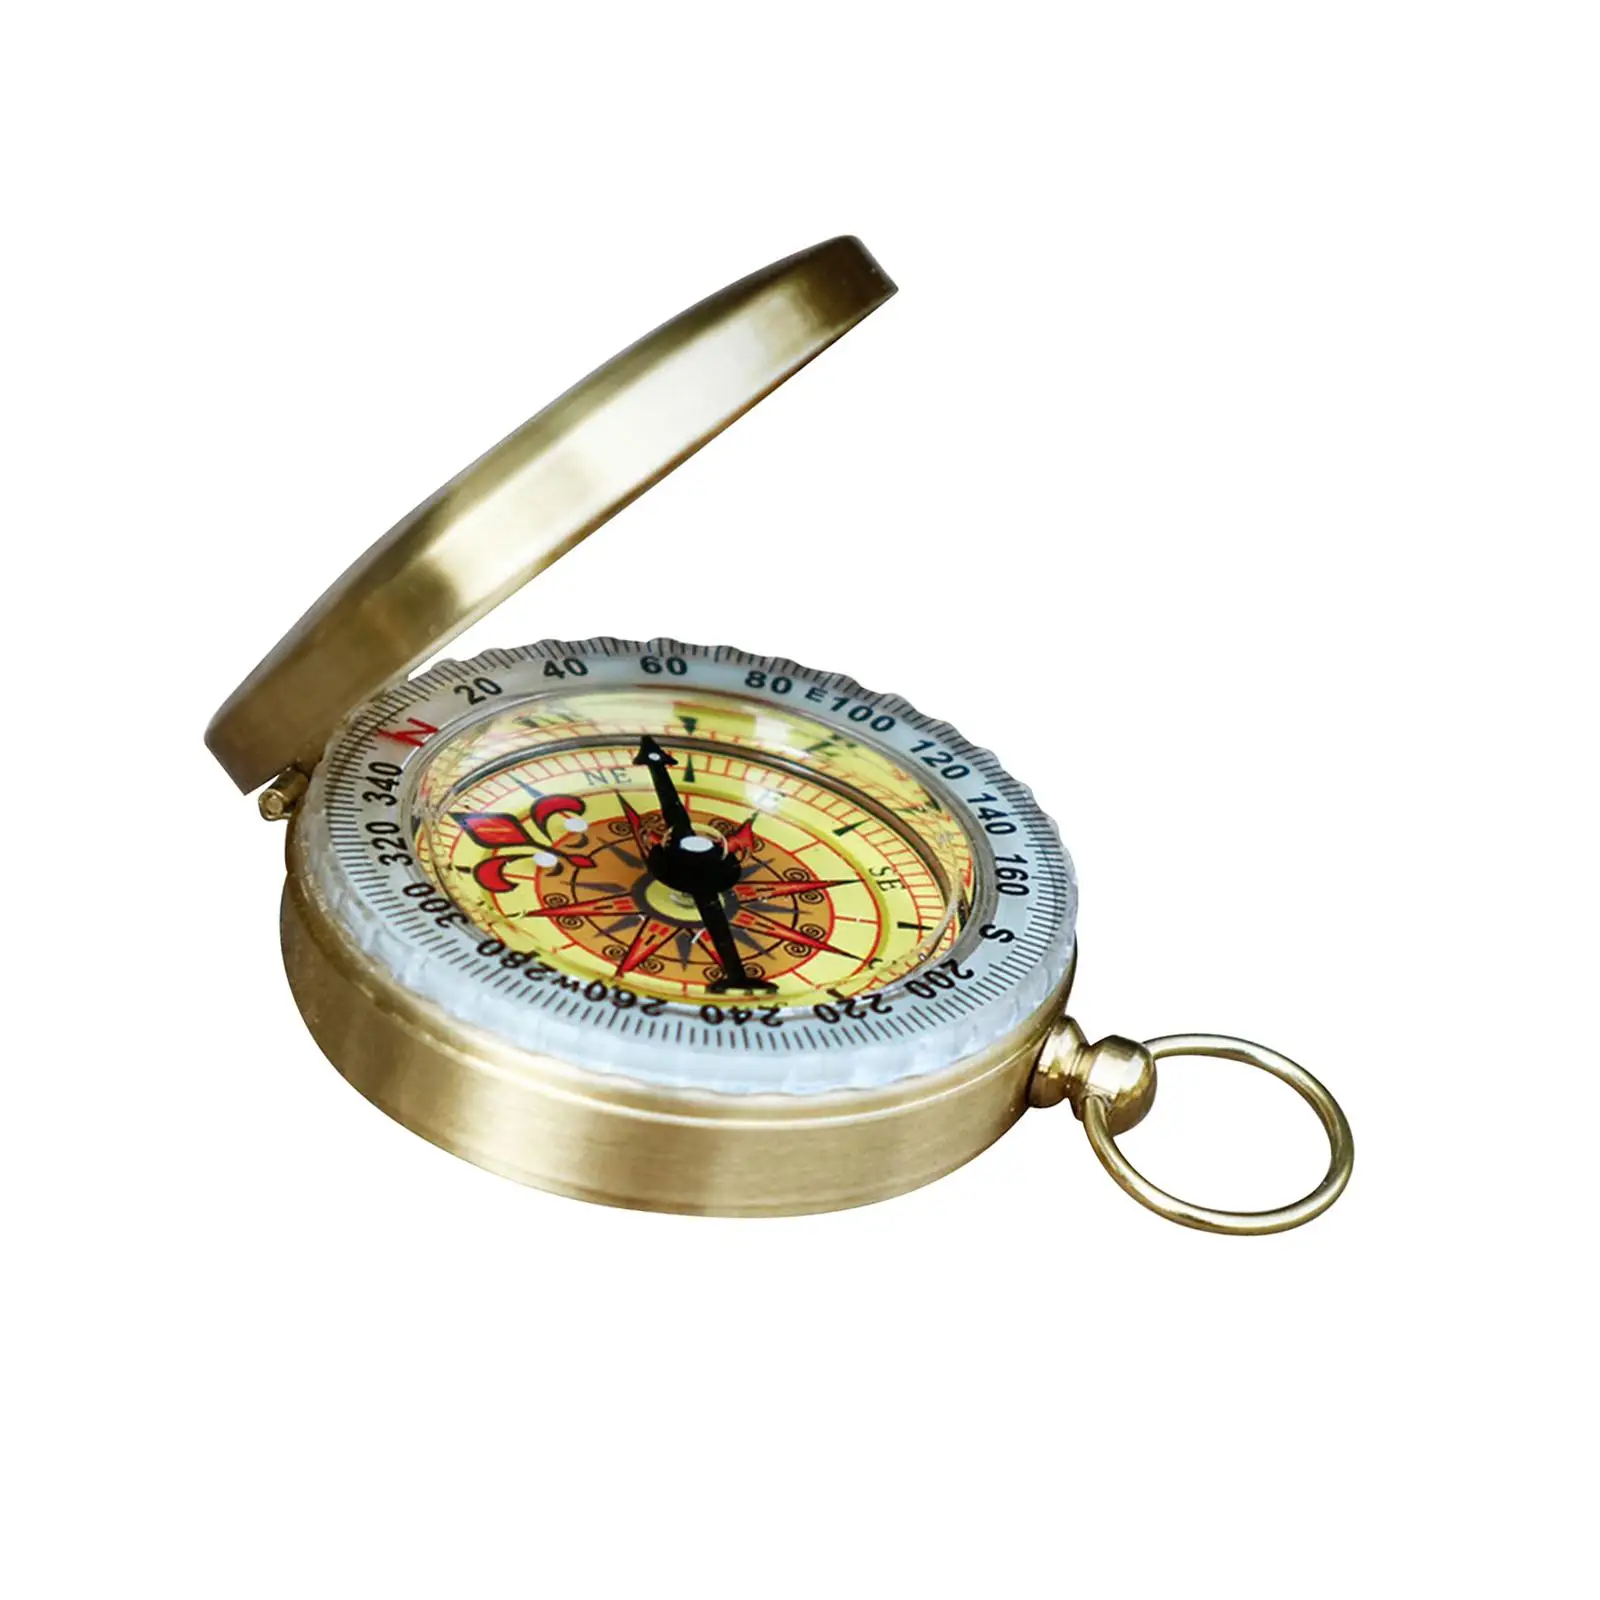 Camping Survival Compass Waterproof Classic Pocket Style Compass Brass Compass for Orienteering Camping Outdoor Activities